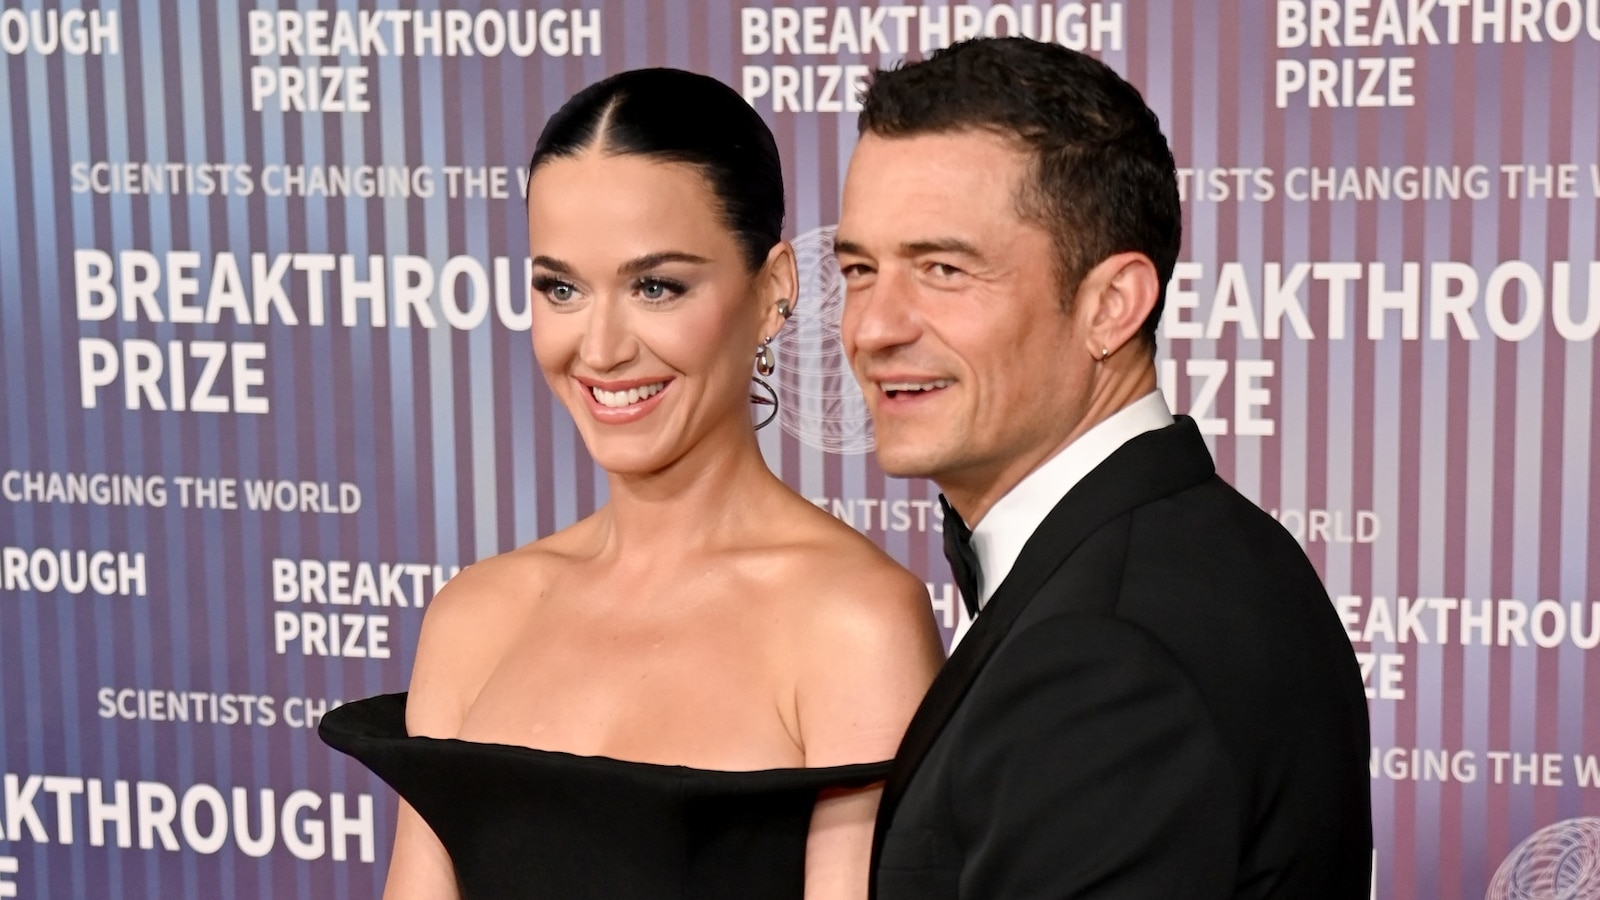 Orlando Bloom on why his relationship with Katy Perry works